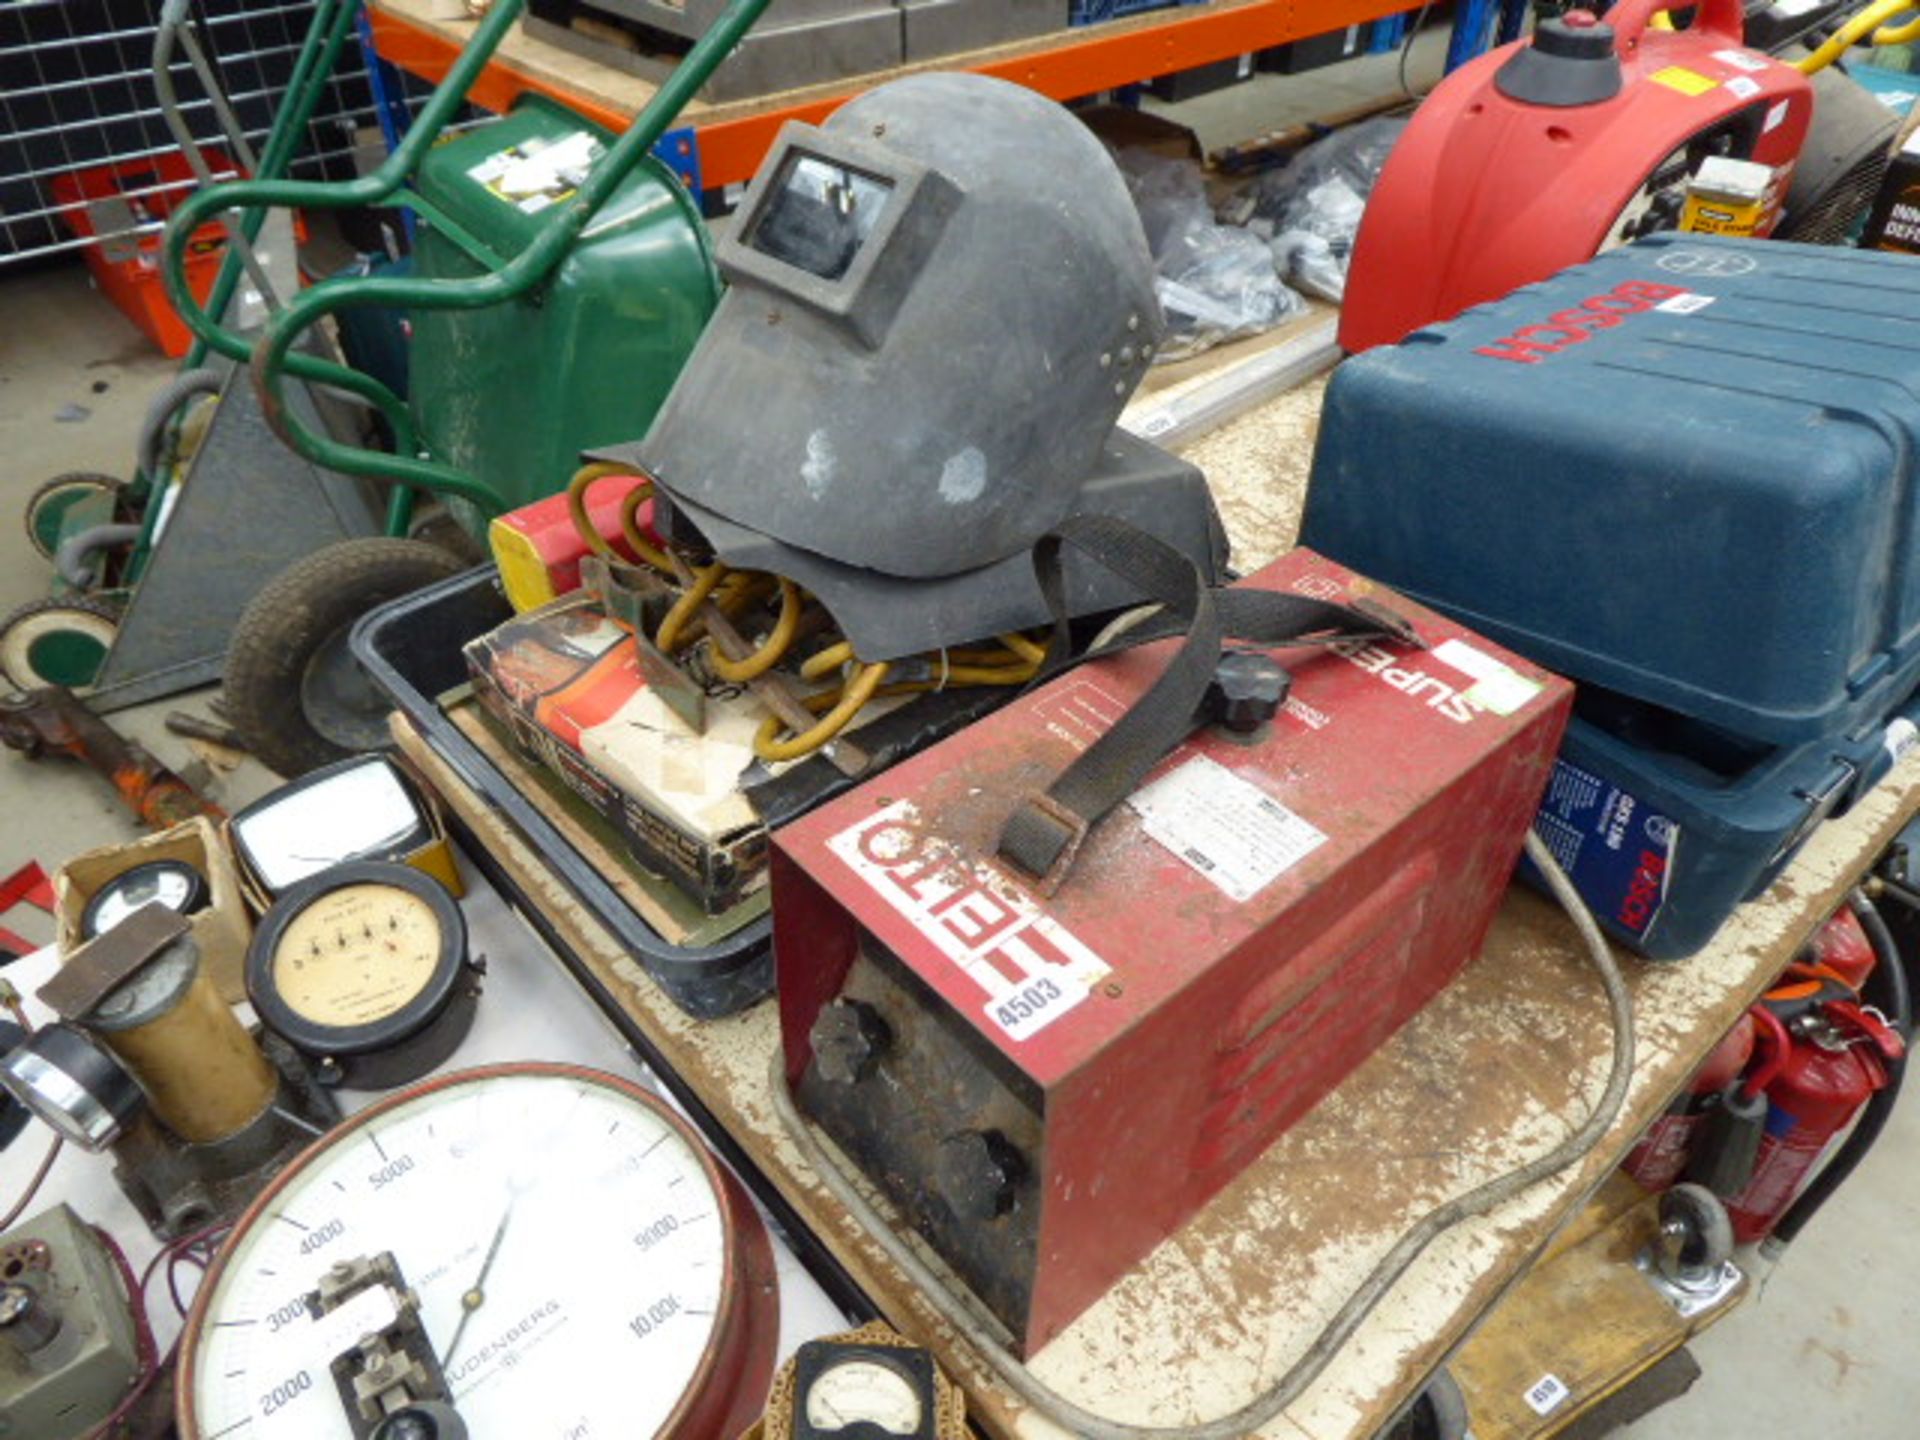 Super 90 welder with quantity of welding rods and equipment